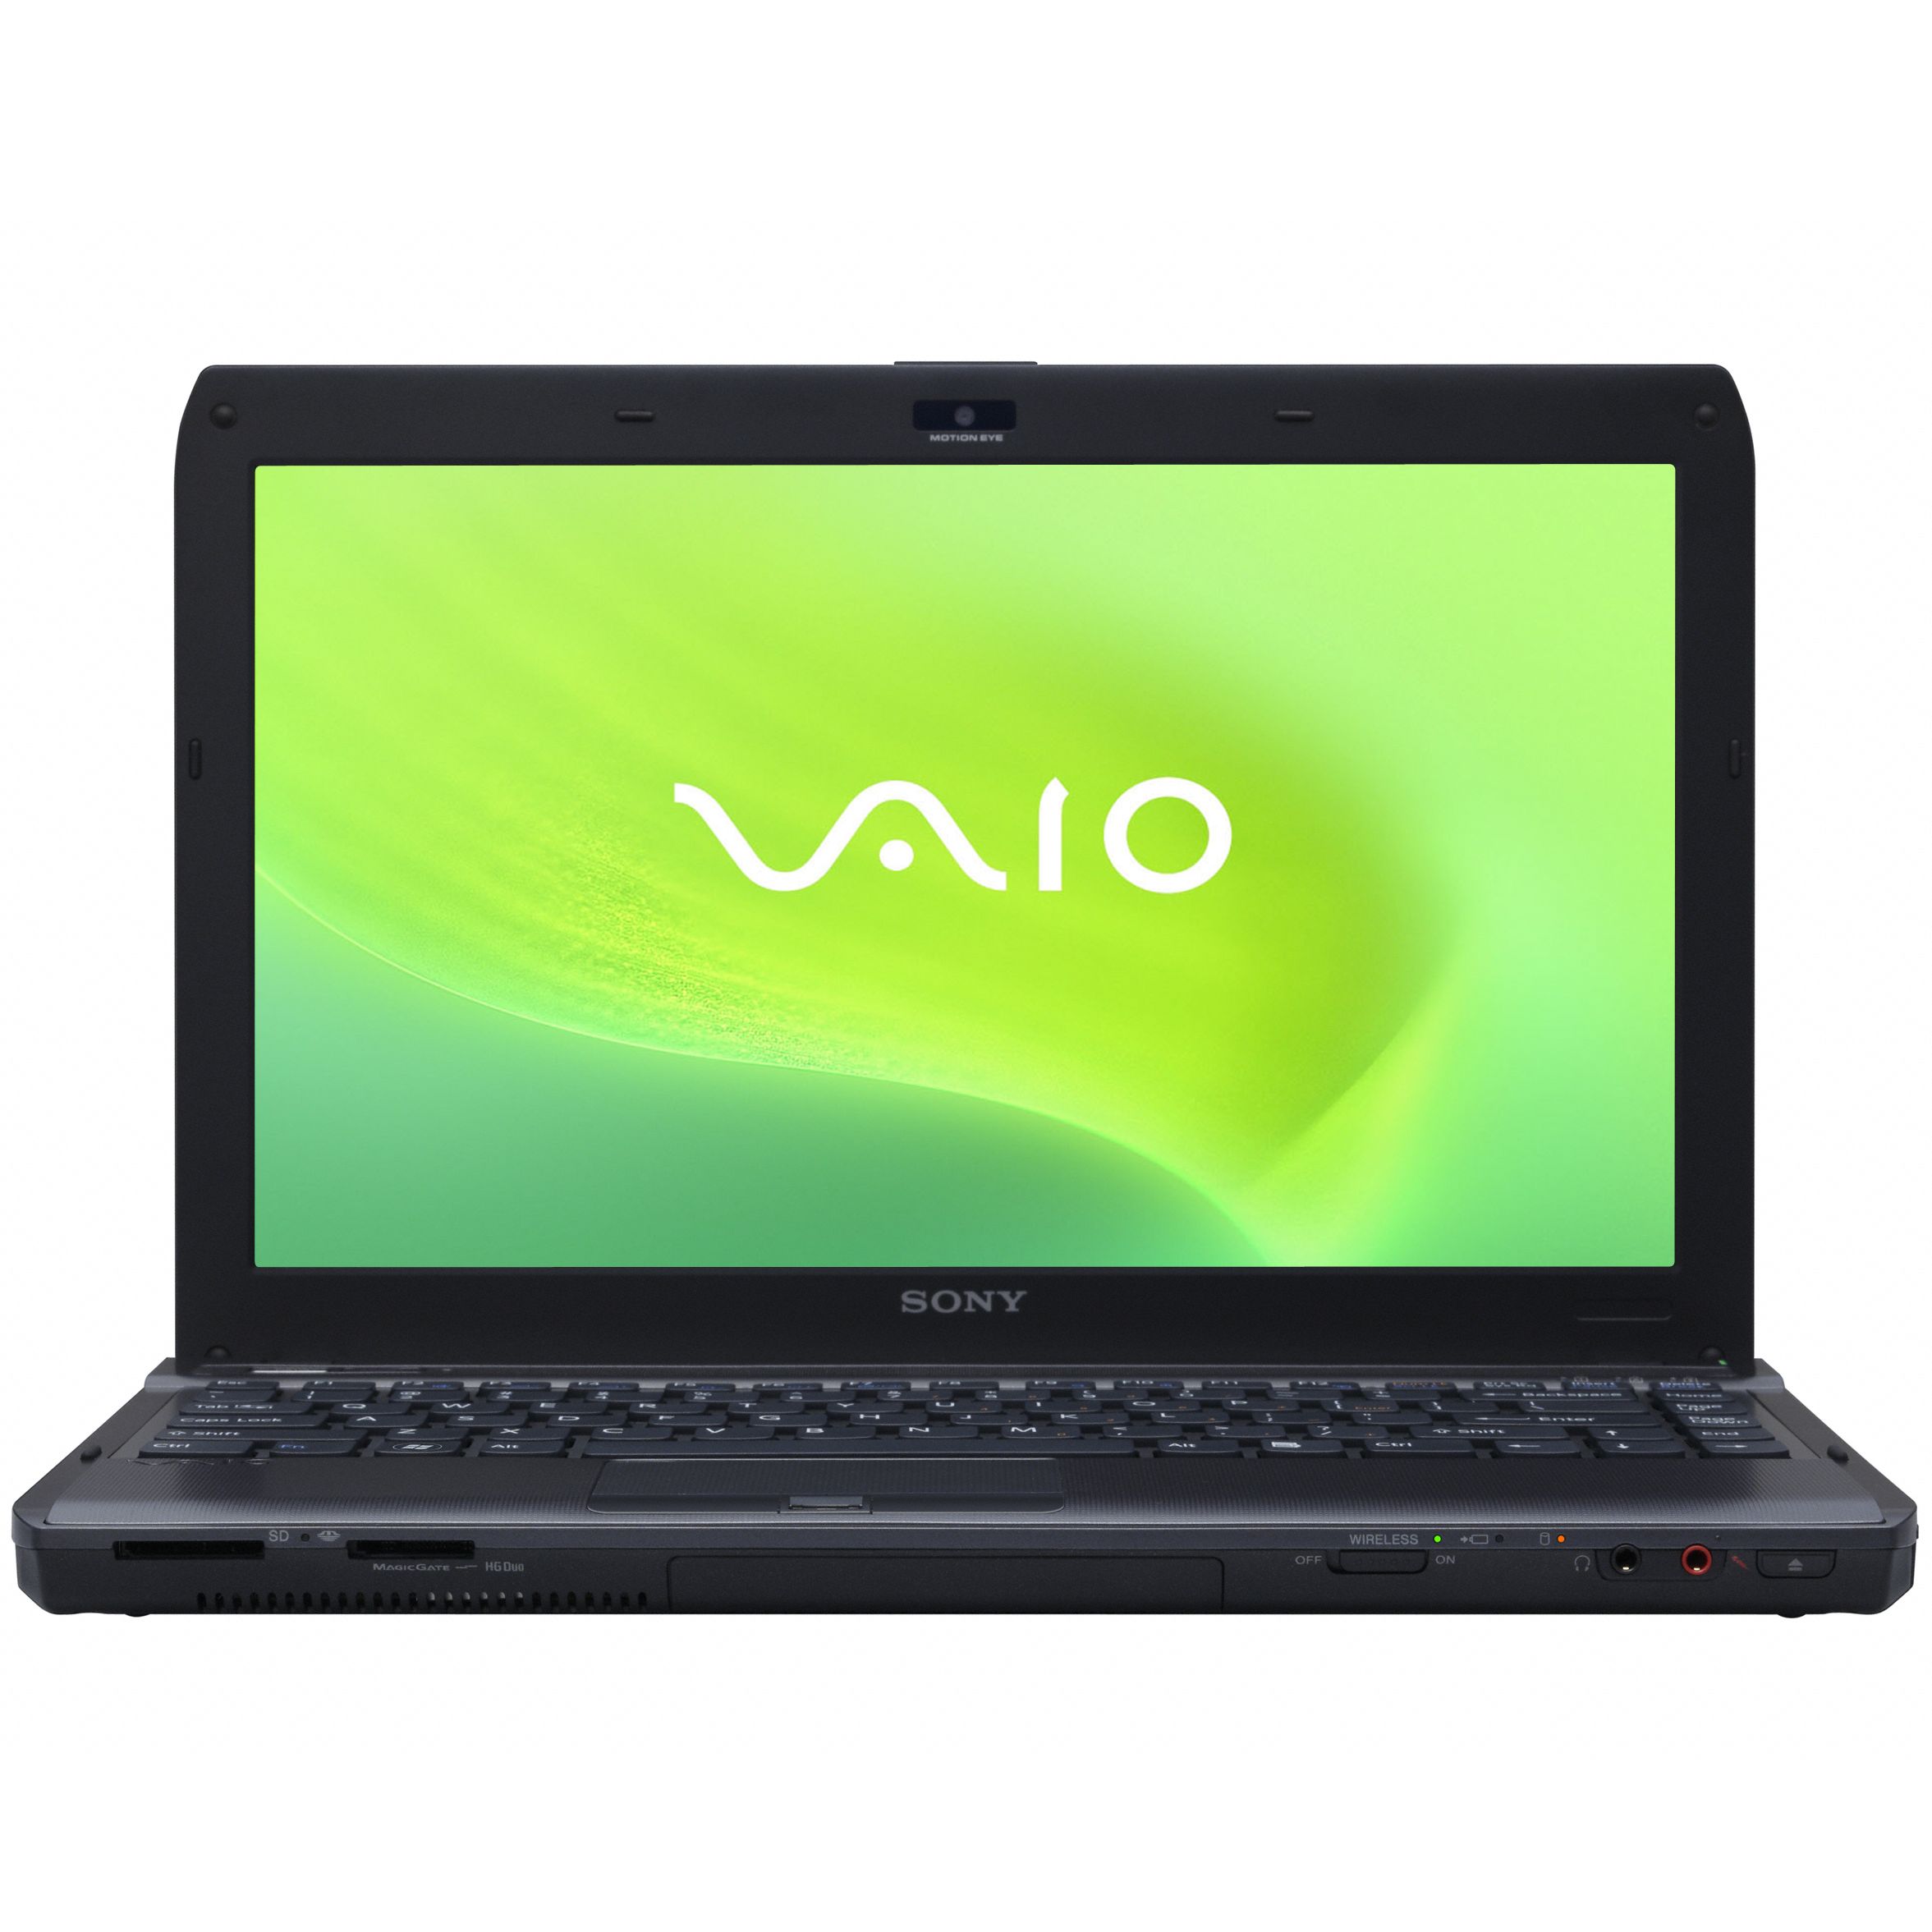 Sony Vaio VPC-S13L9E/B Laptop, Intel Core i3, 500GB, 2.4GHz, 4GB RAM with 13.3 Inch Display at John Lewis